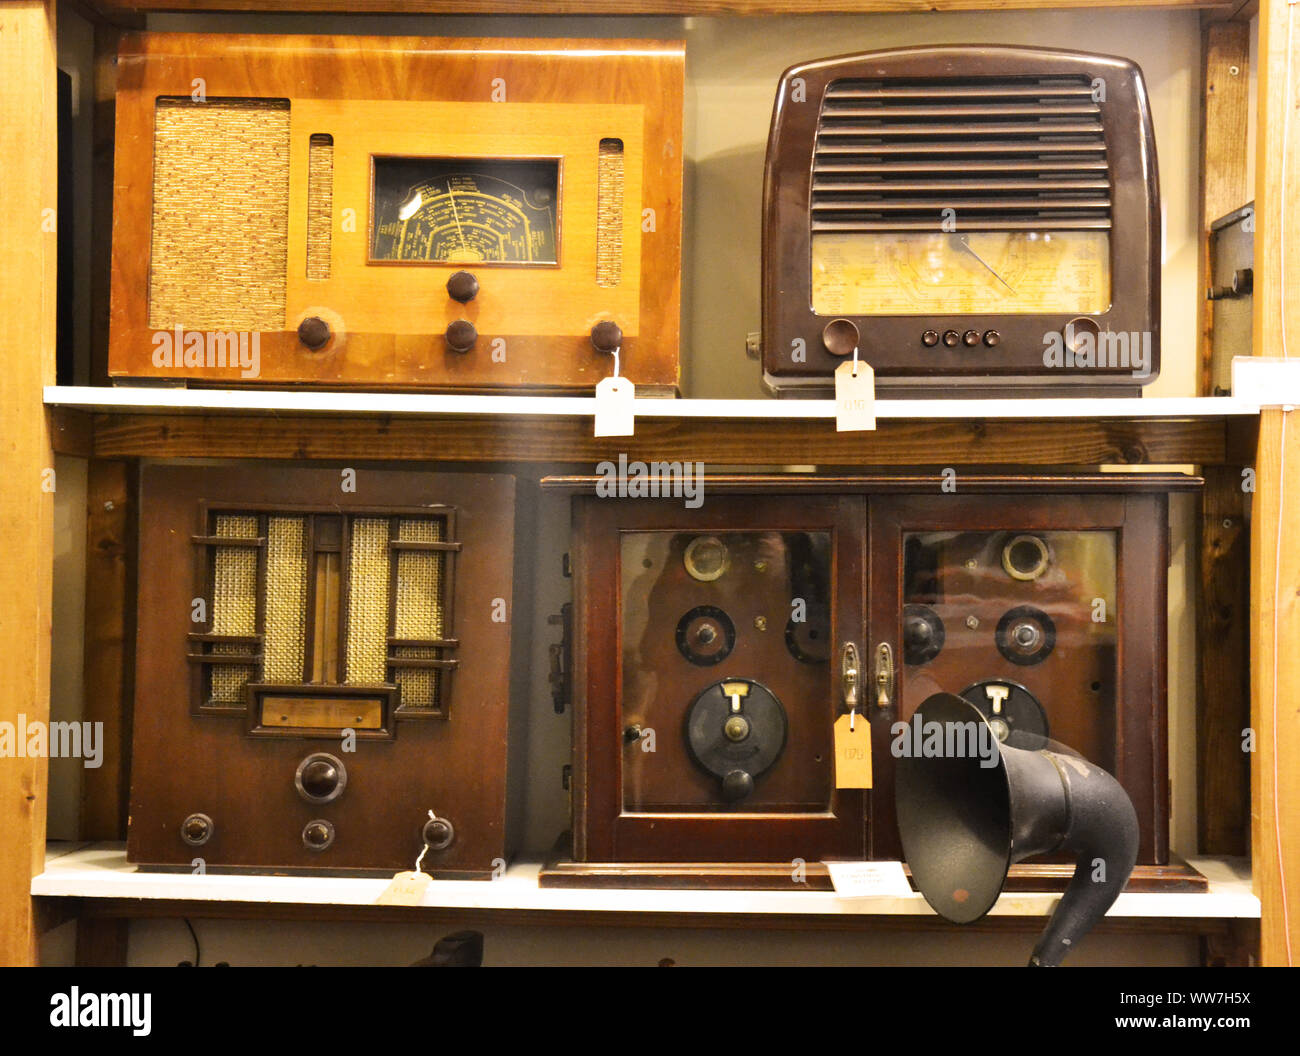 Old vintage radios in a museum Stock Photo - Alamy